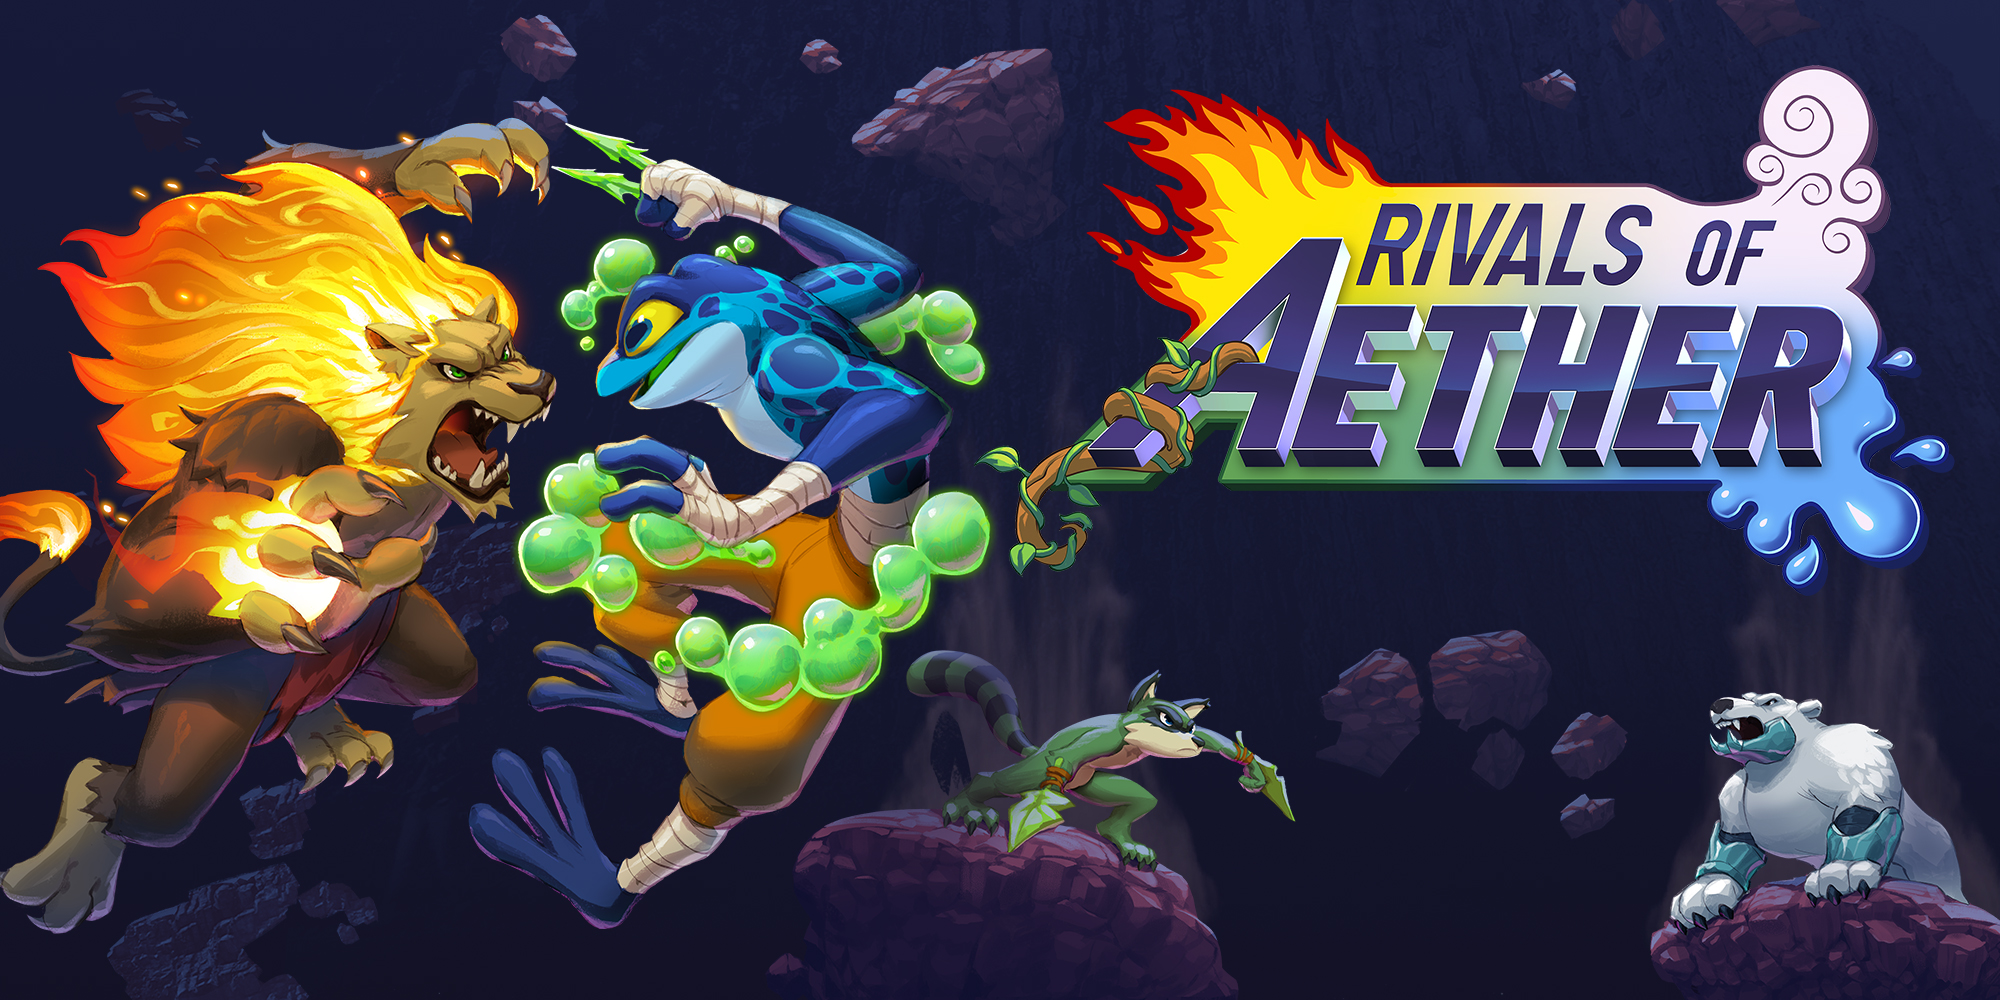 Rivals of Aether Mobile iOS/APK Version Download